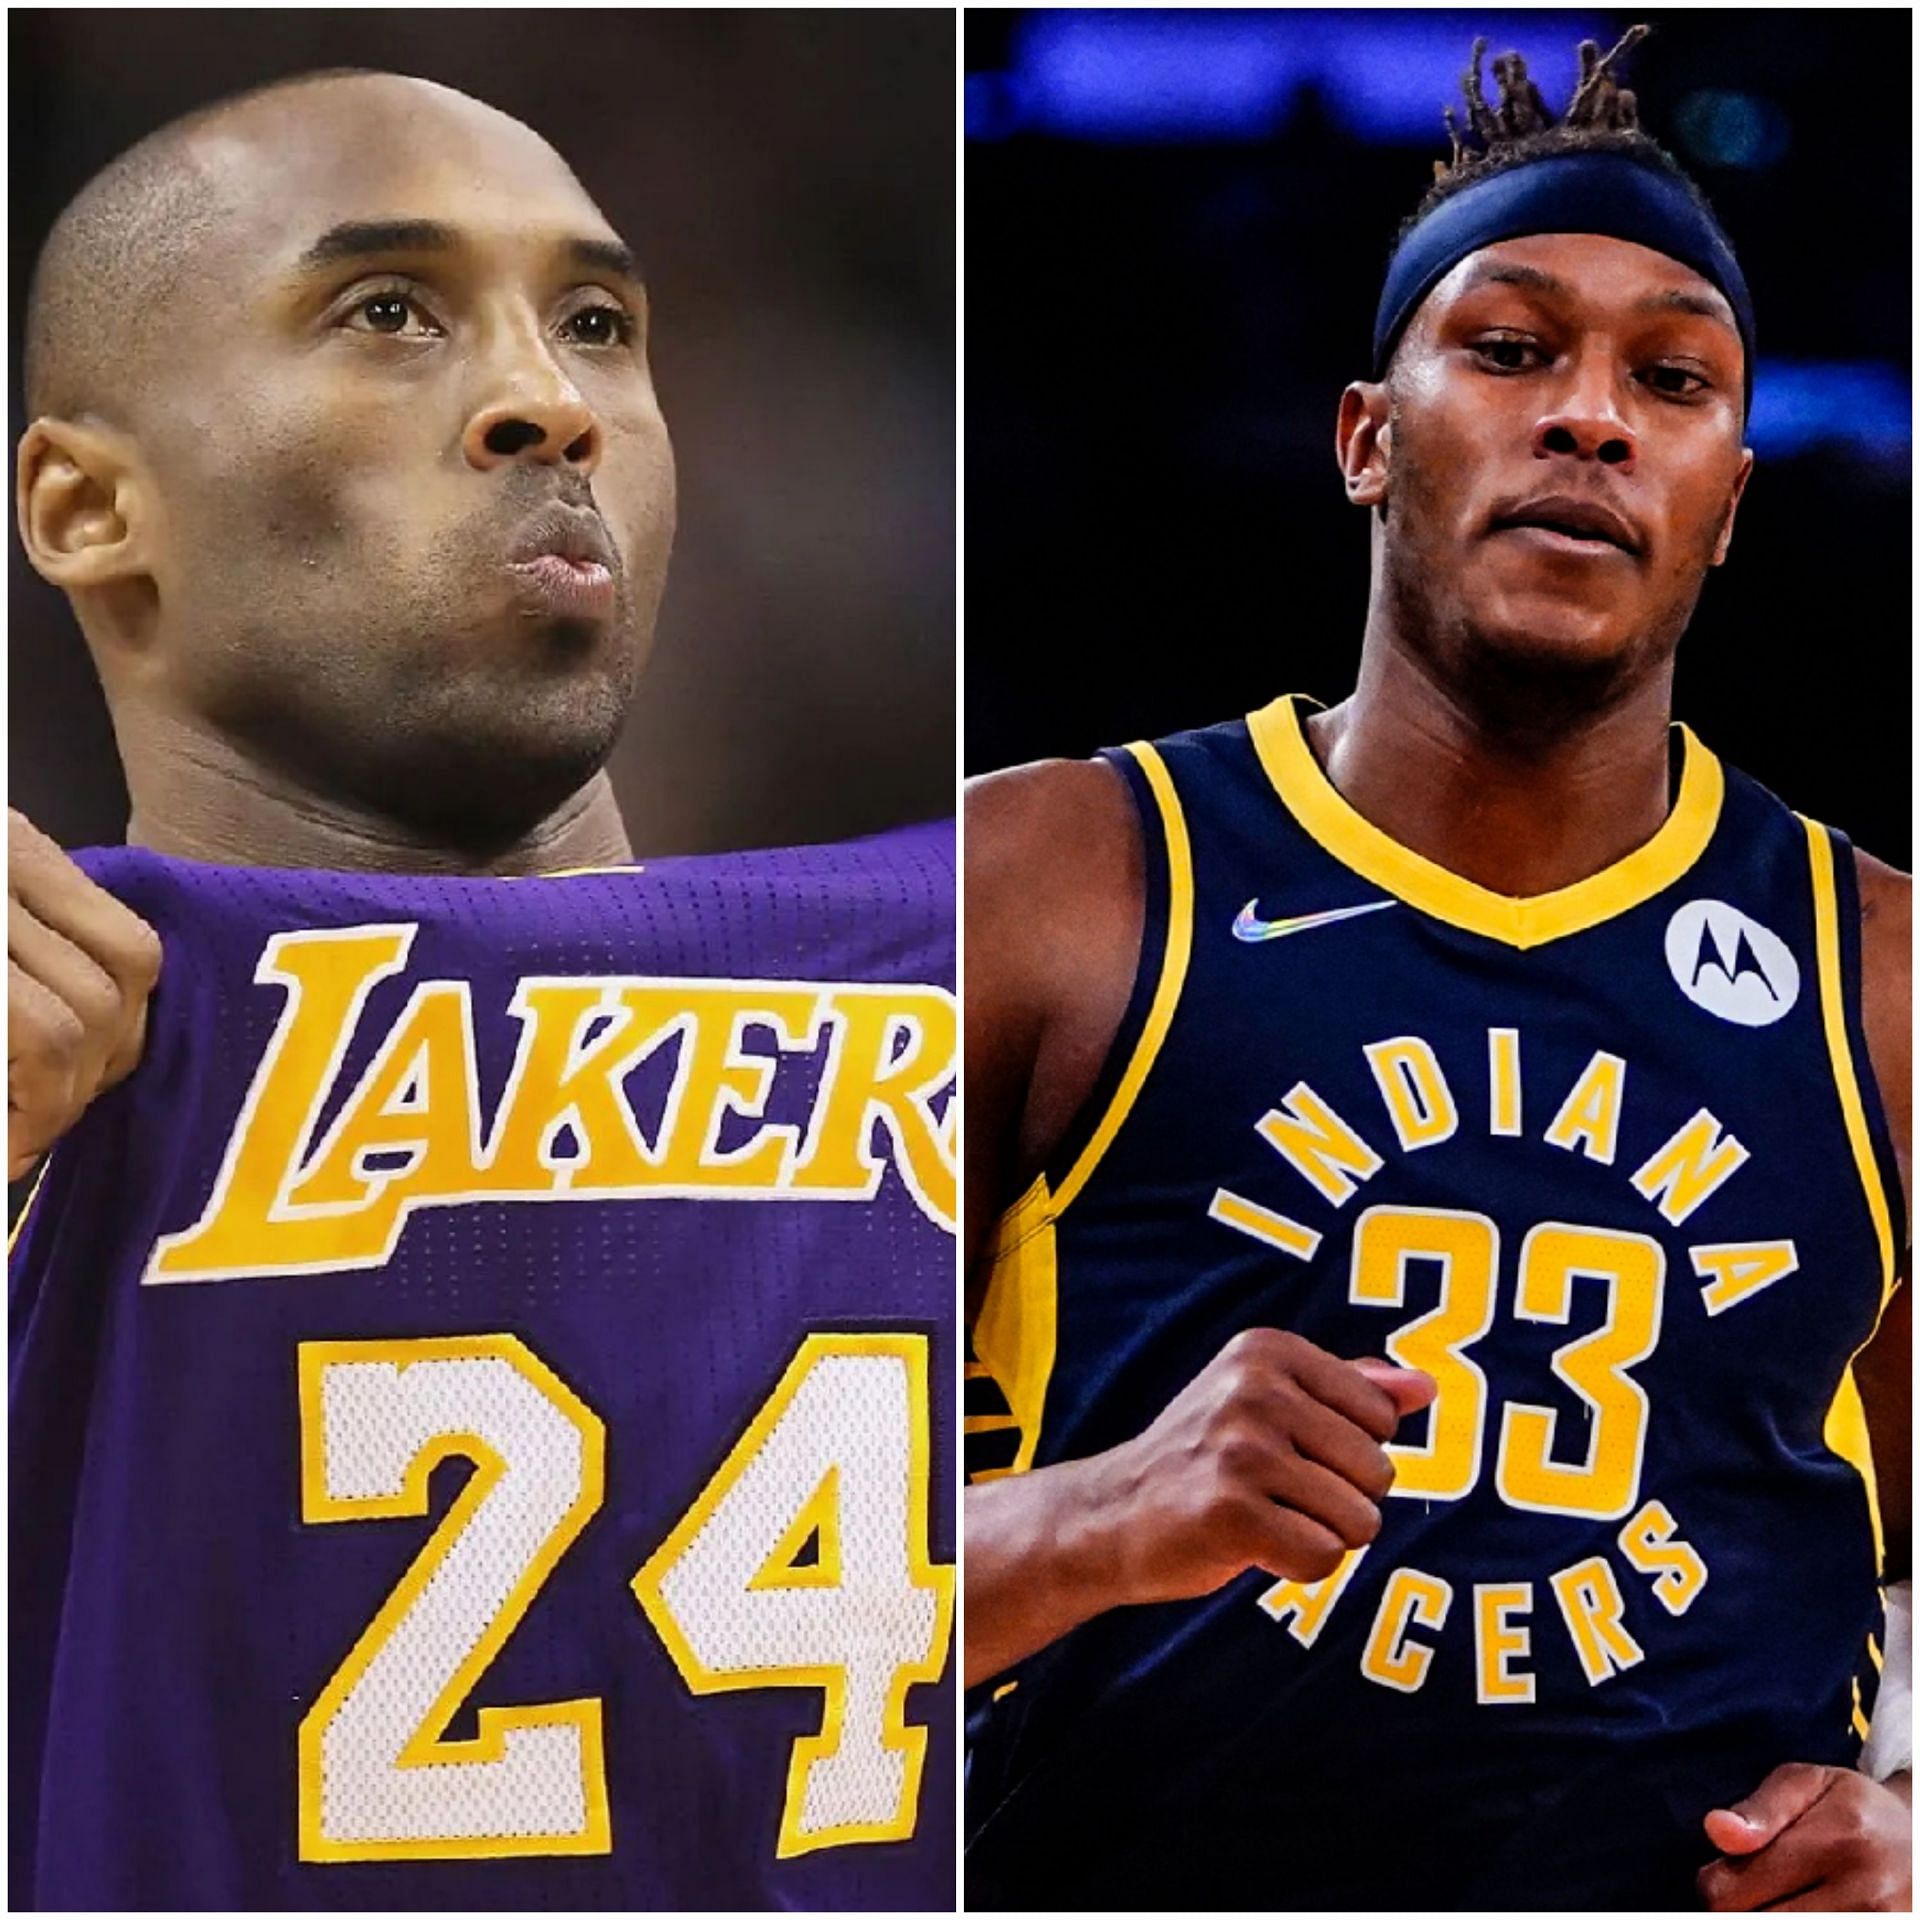 Kobe Bryant defeated Myles Turner while playing in his farewell tour.